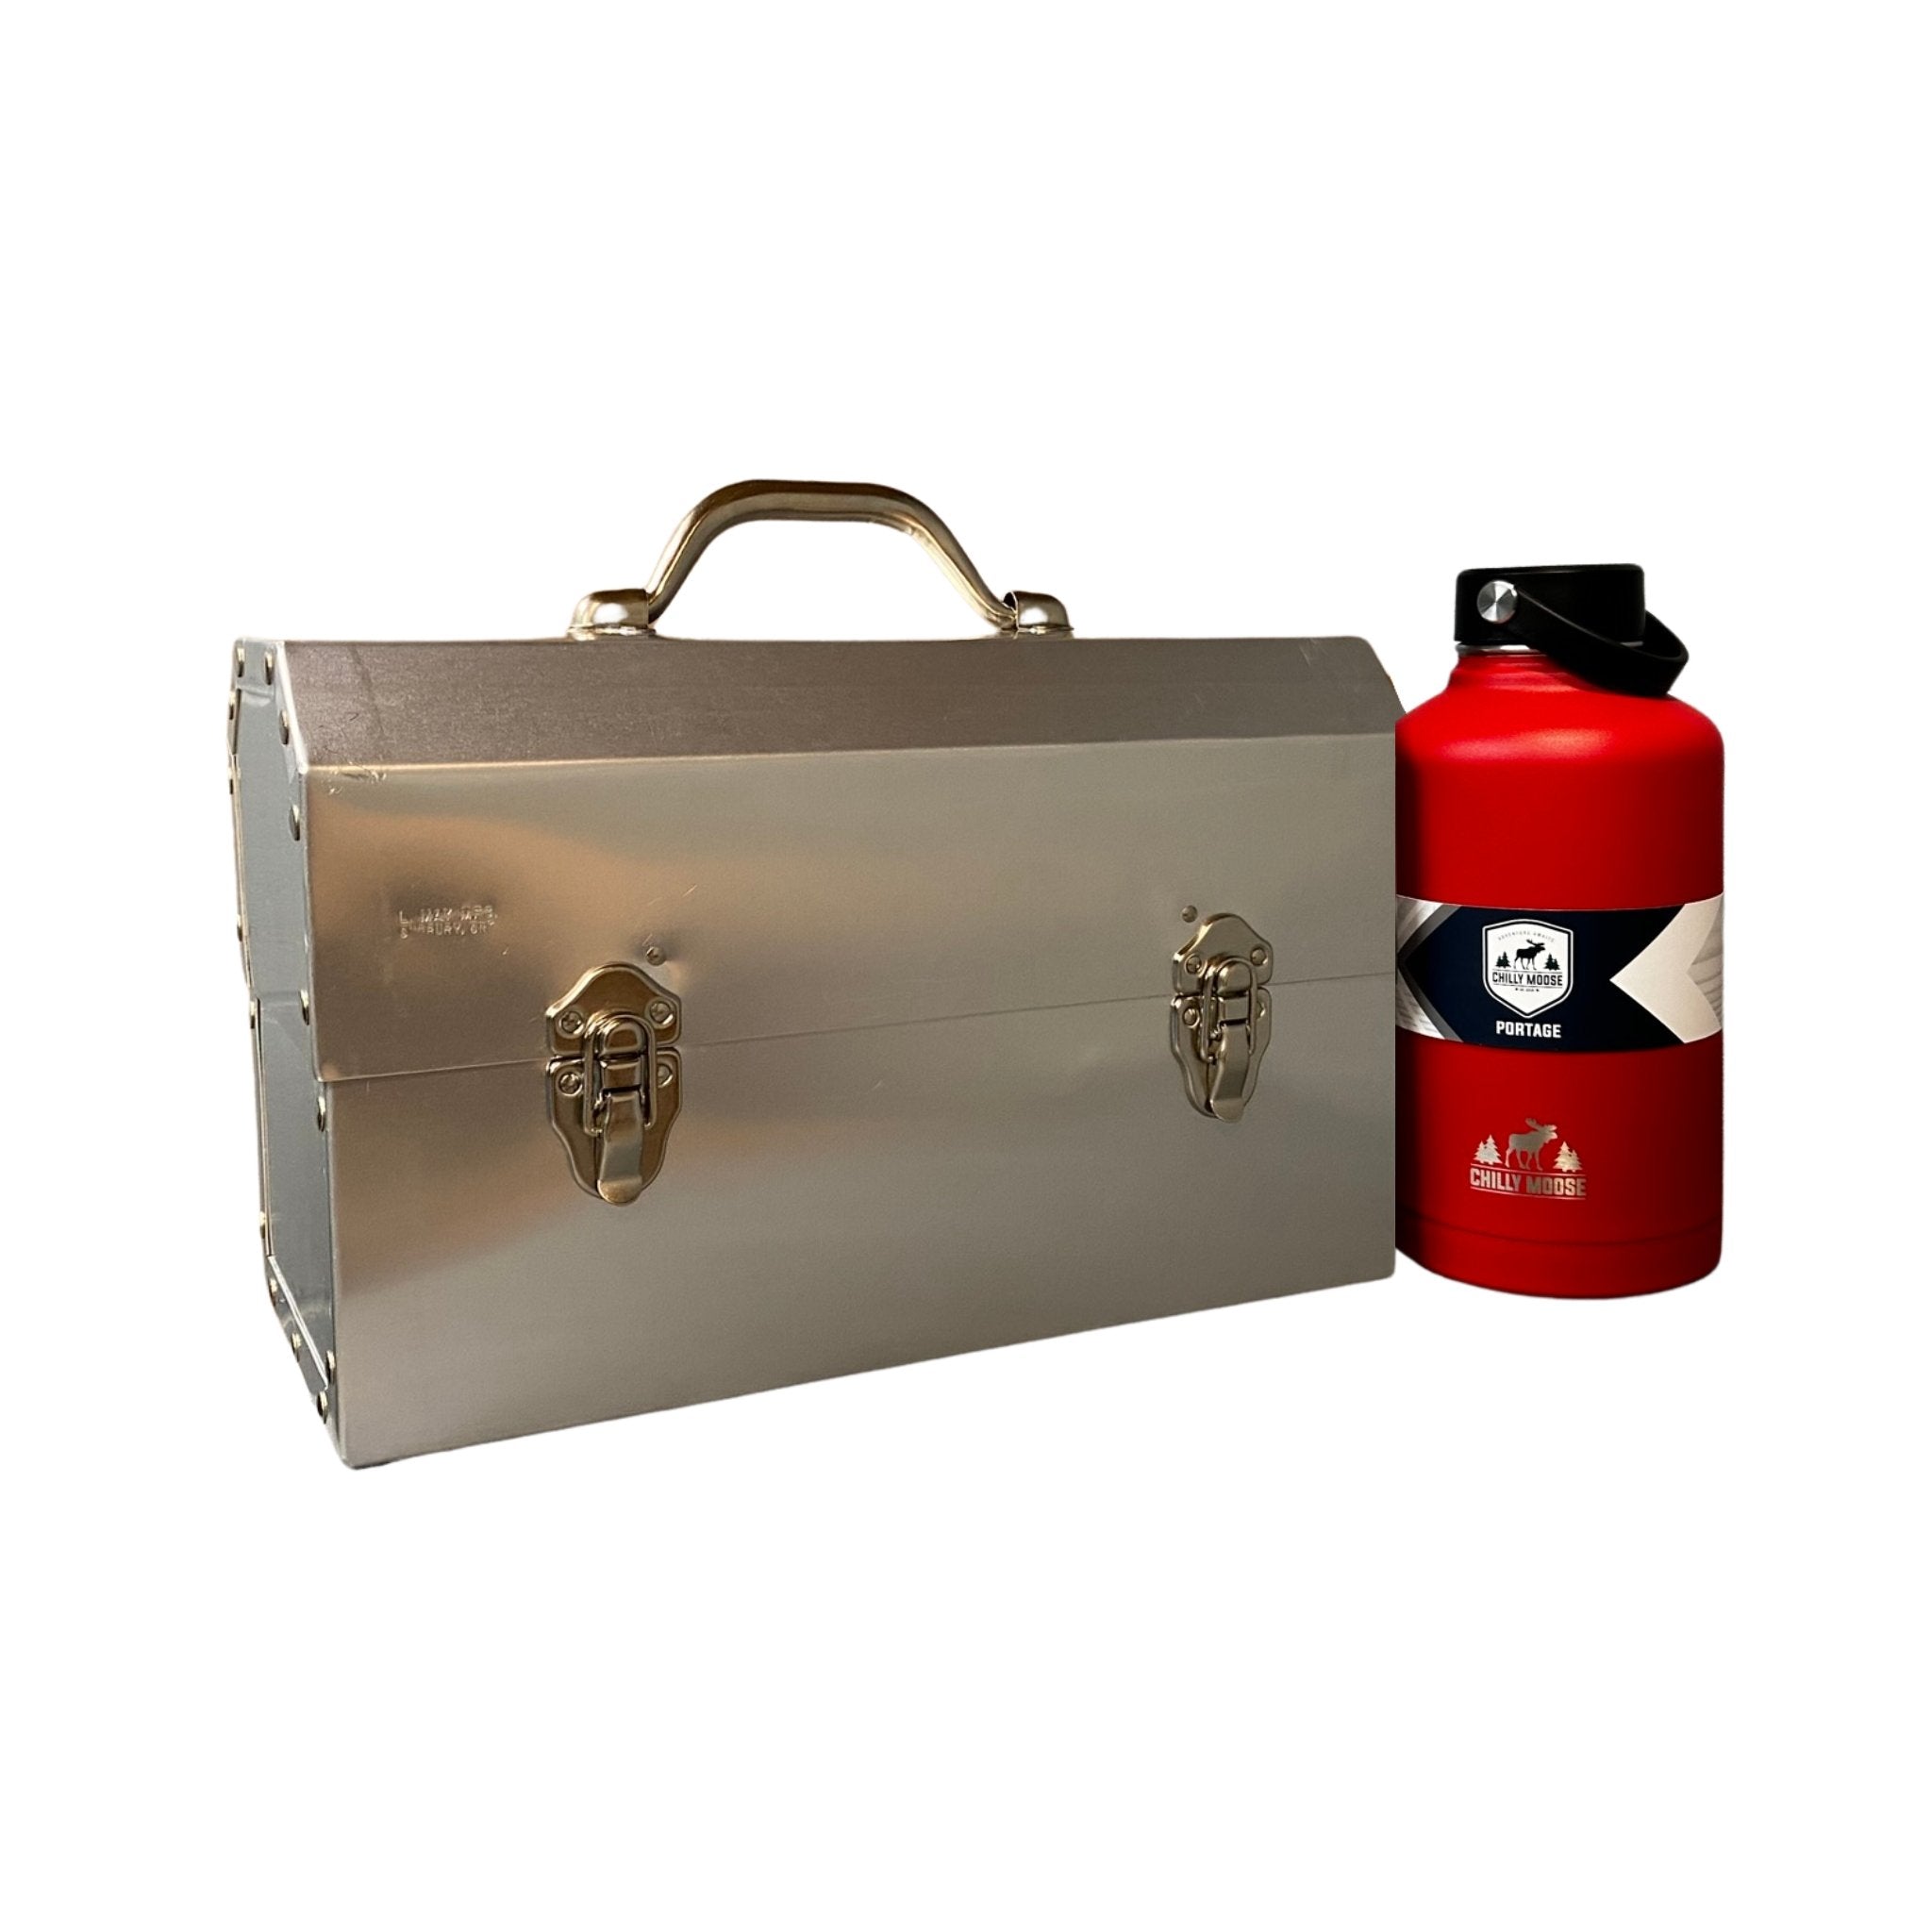 The Super Classic + 64oz Portage Canteen Red - The Miners LunchboxThe Miners Lunchbox